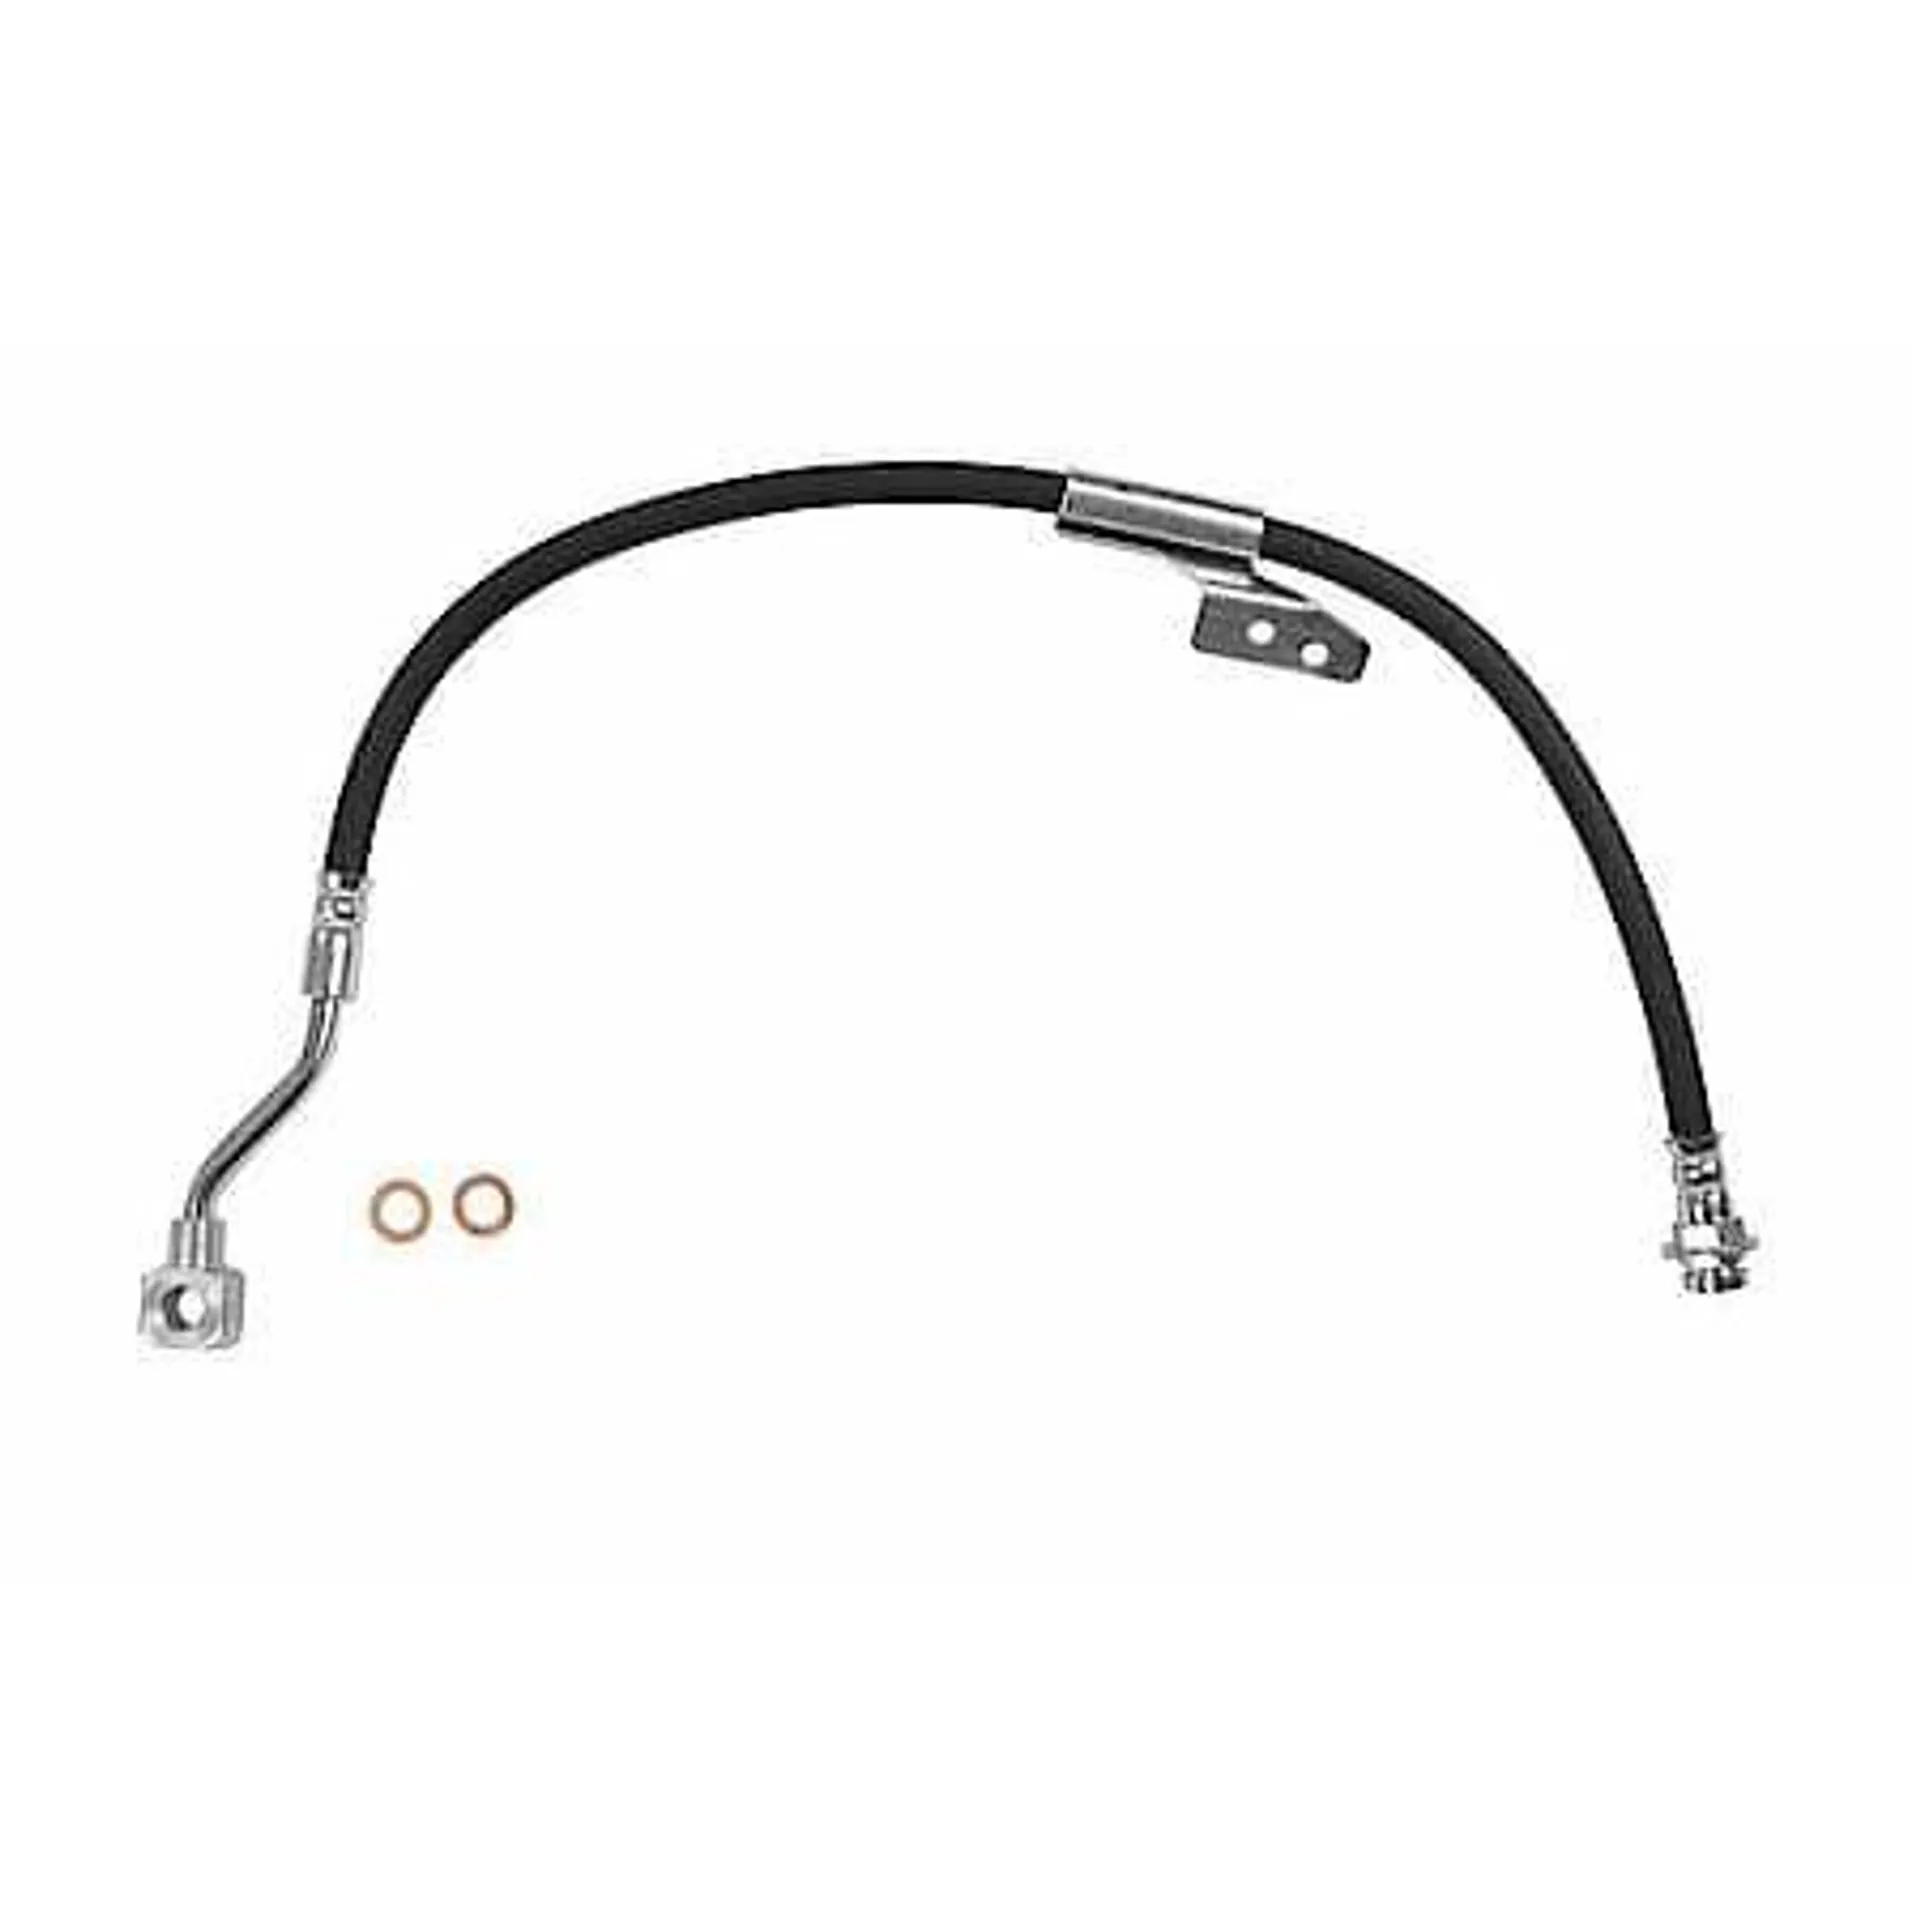 Carquest Wearever Brake Hose Assembly: Copper Washers Included